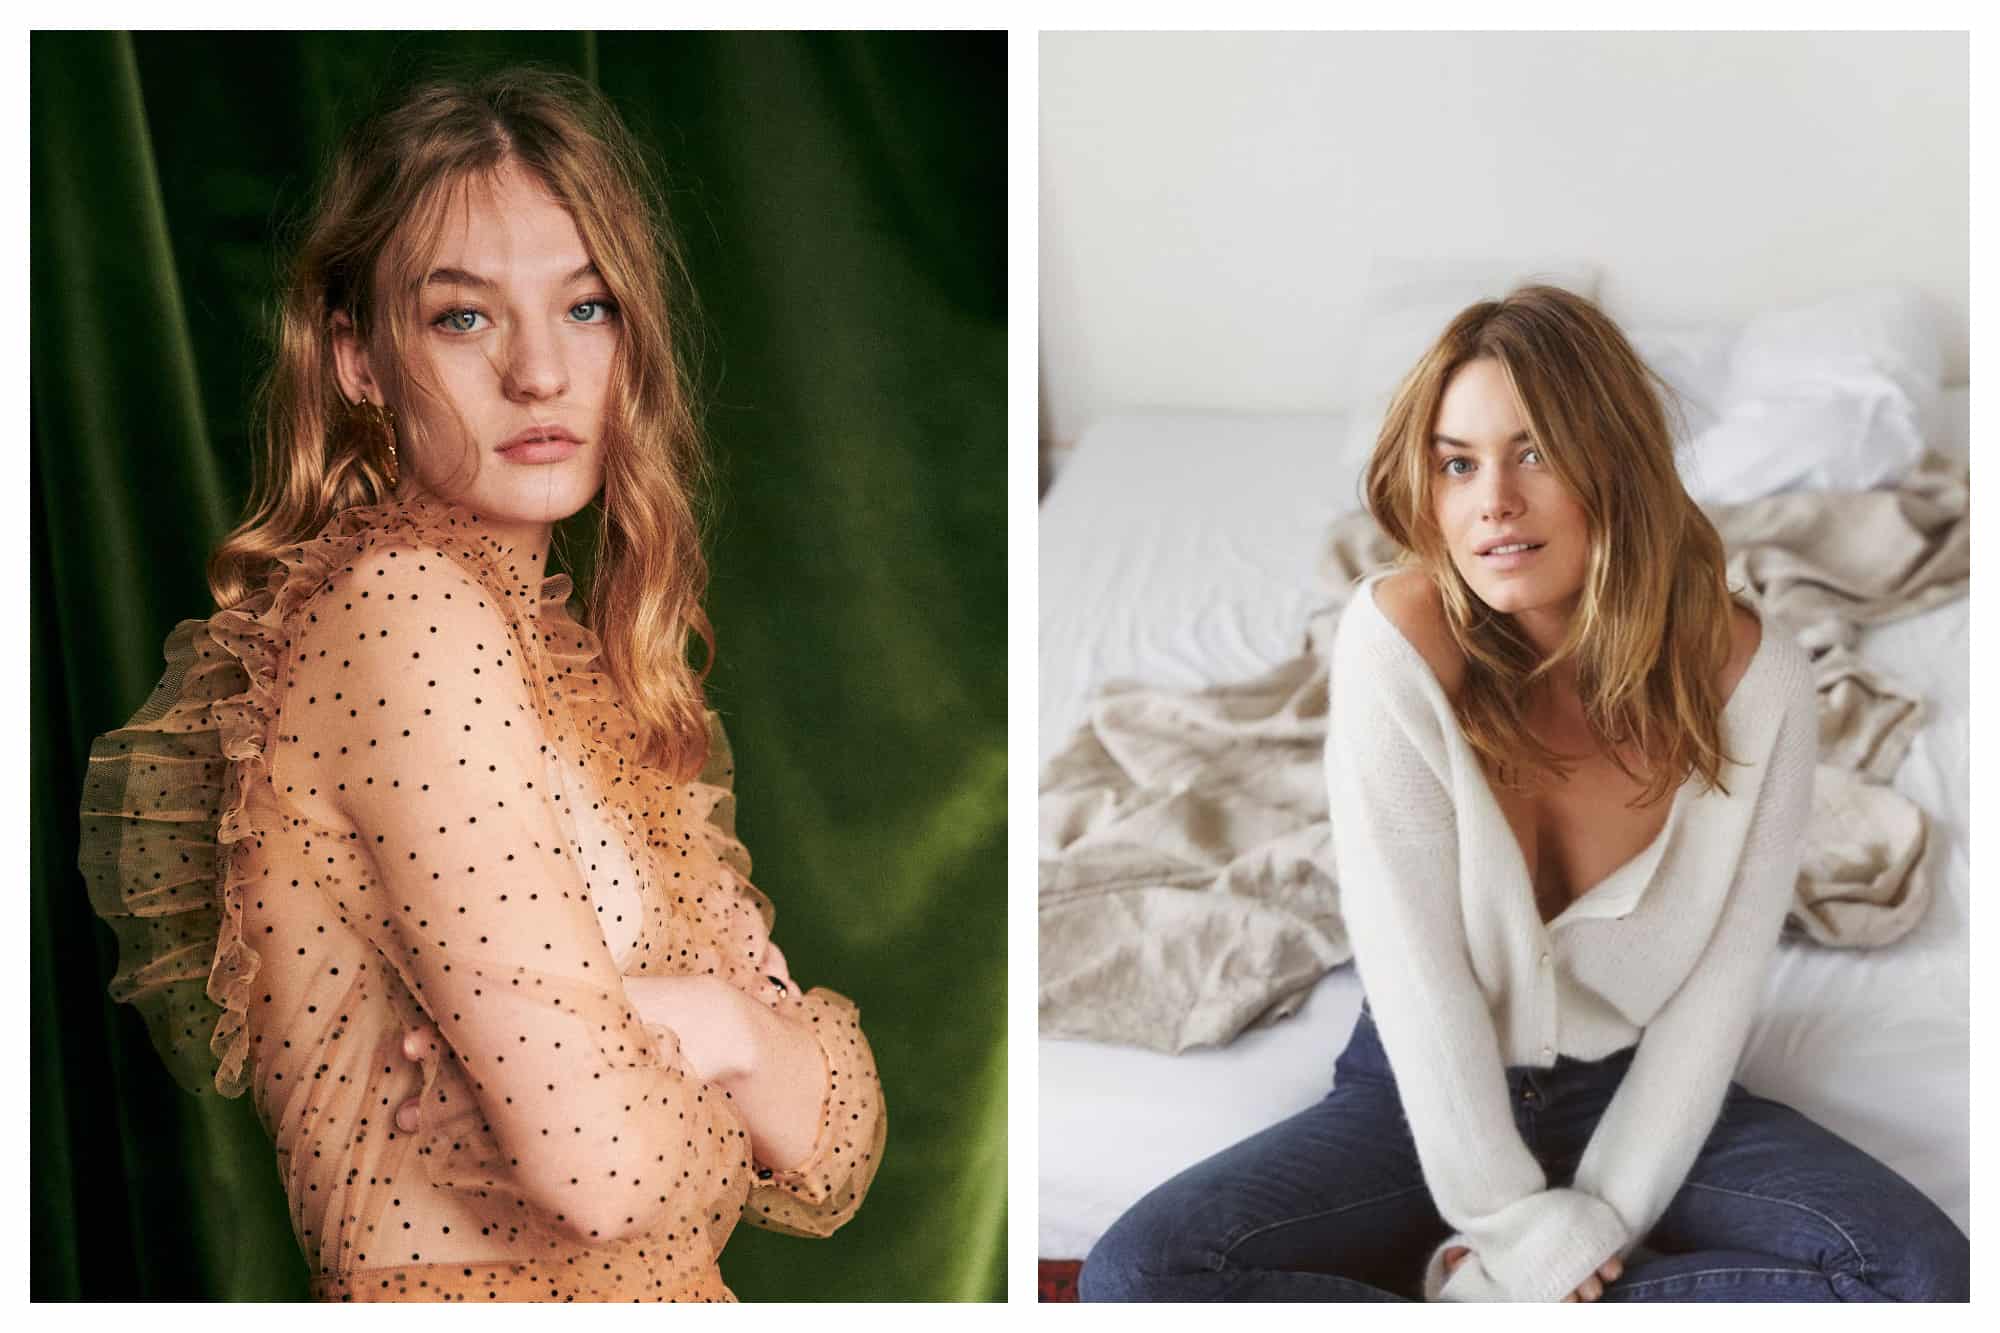 On left: A blond mondel stares piercingly at the camera, arms folded and turned away. She wears a textured tulle shirt, sheer with long-sleeves, and a polk-a-dot detail and ruffles along the shoulders, by the Paris fashion brand Sézane. On right: A model smiles at the camera while sitting on a bed, crumpled sheets behind her. She wears jeans and just an off-the-shoulder cardigan with extra long sleeves by the Paris fashion brad Suzanne. 